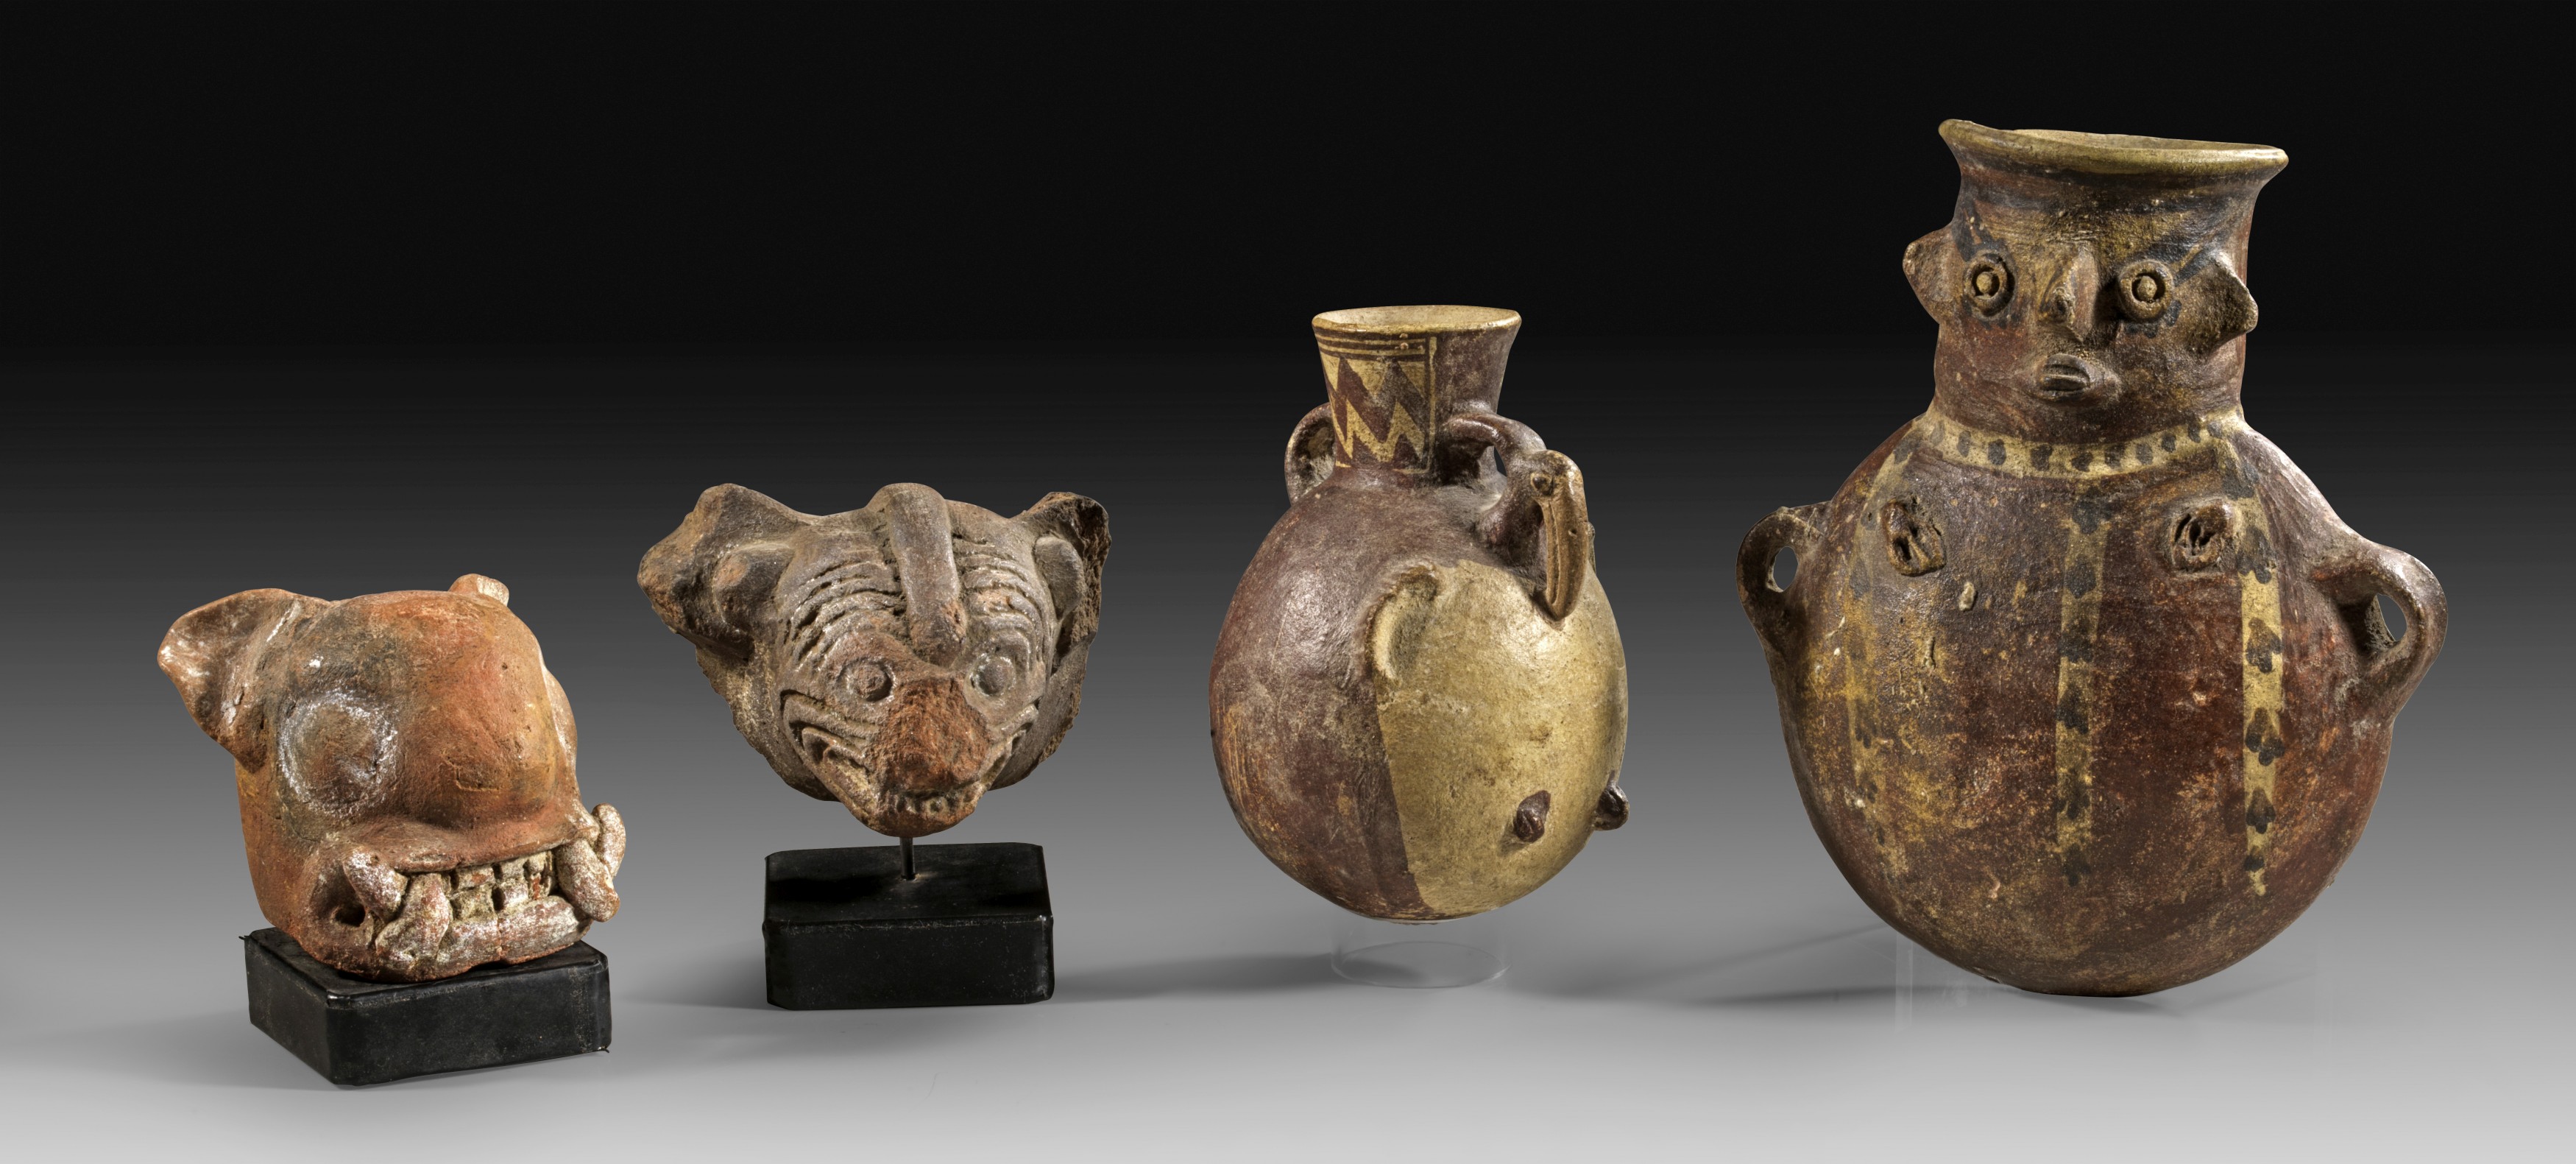 Small but interesting collection of Pre-columbian ceramics. 